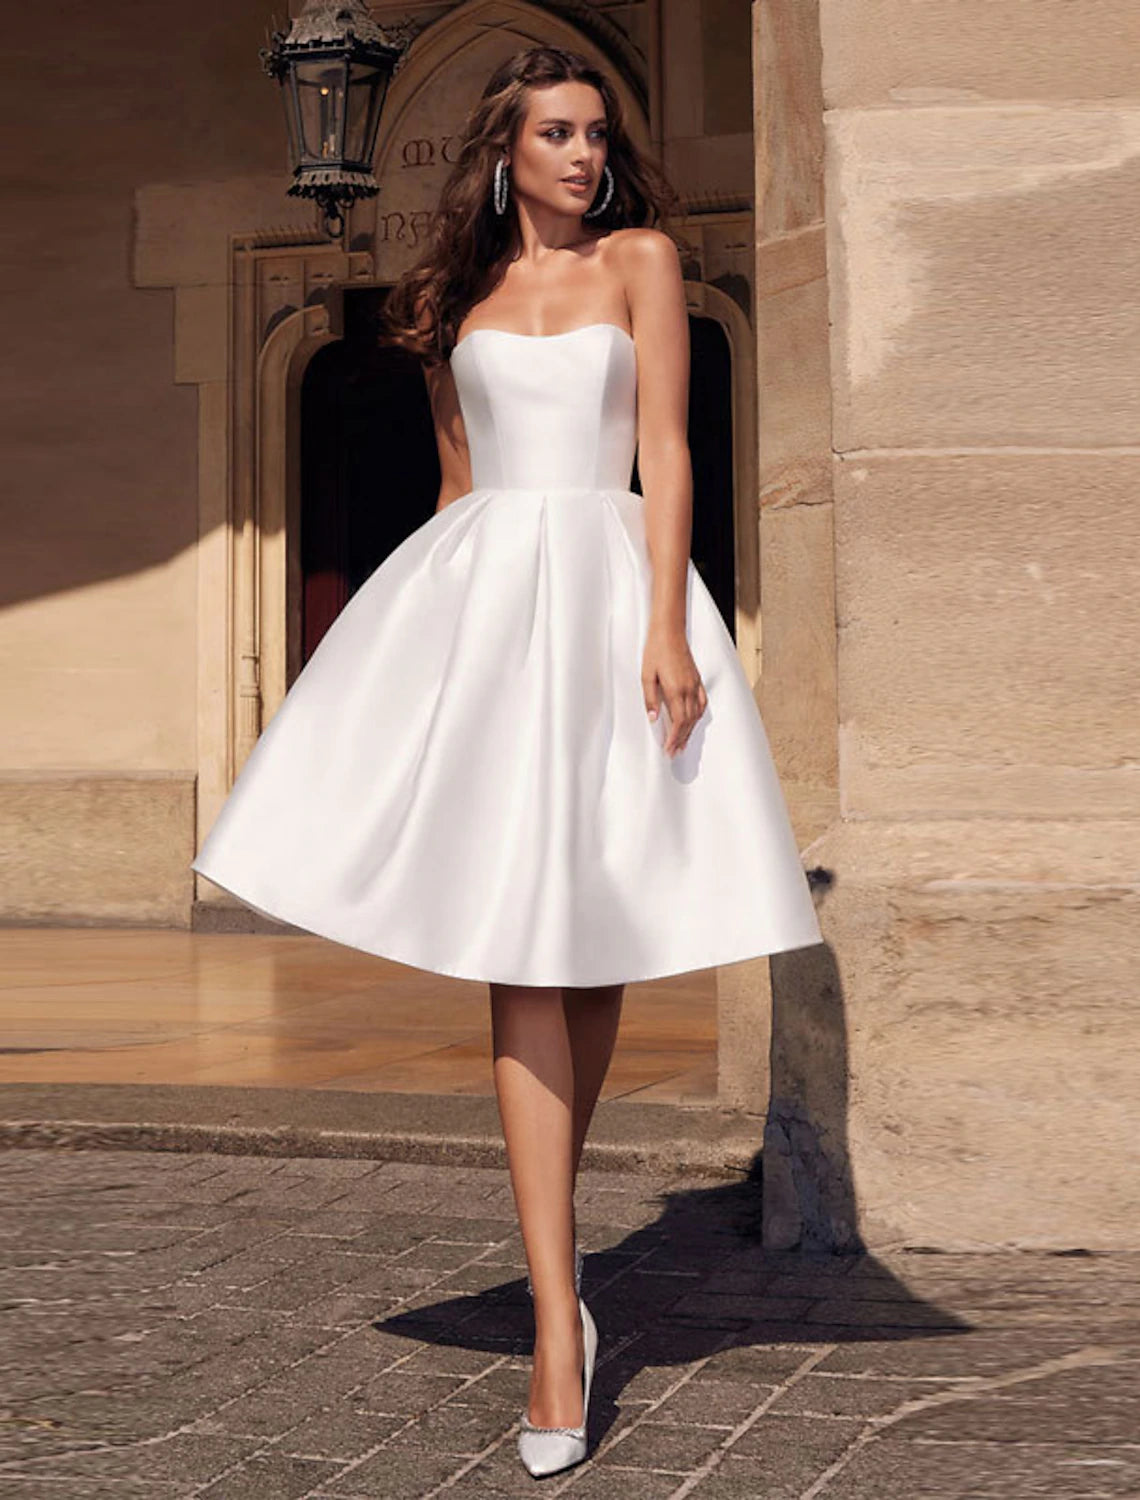 Reception Little White Dresses Wedding Dresses A-Line Sweetheart Strapless Knee Length Satin Bridal Gowns With Solid Color